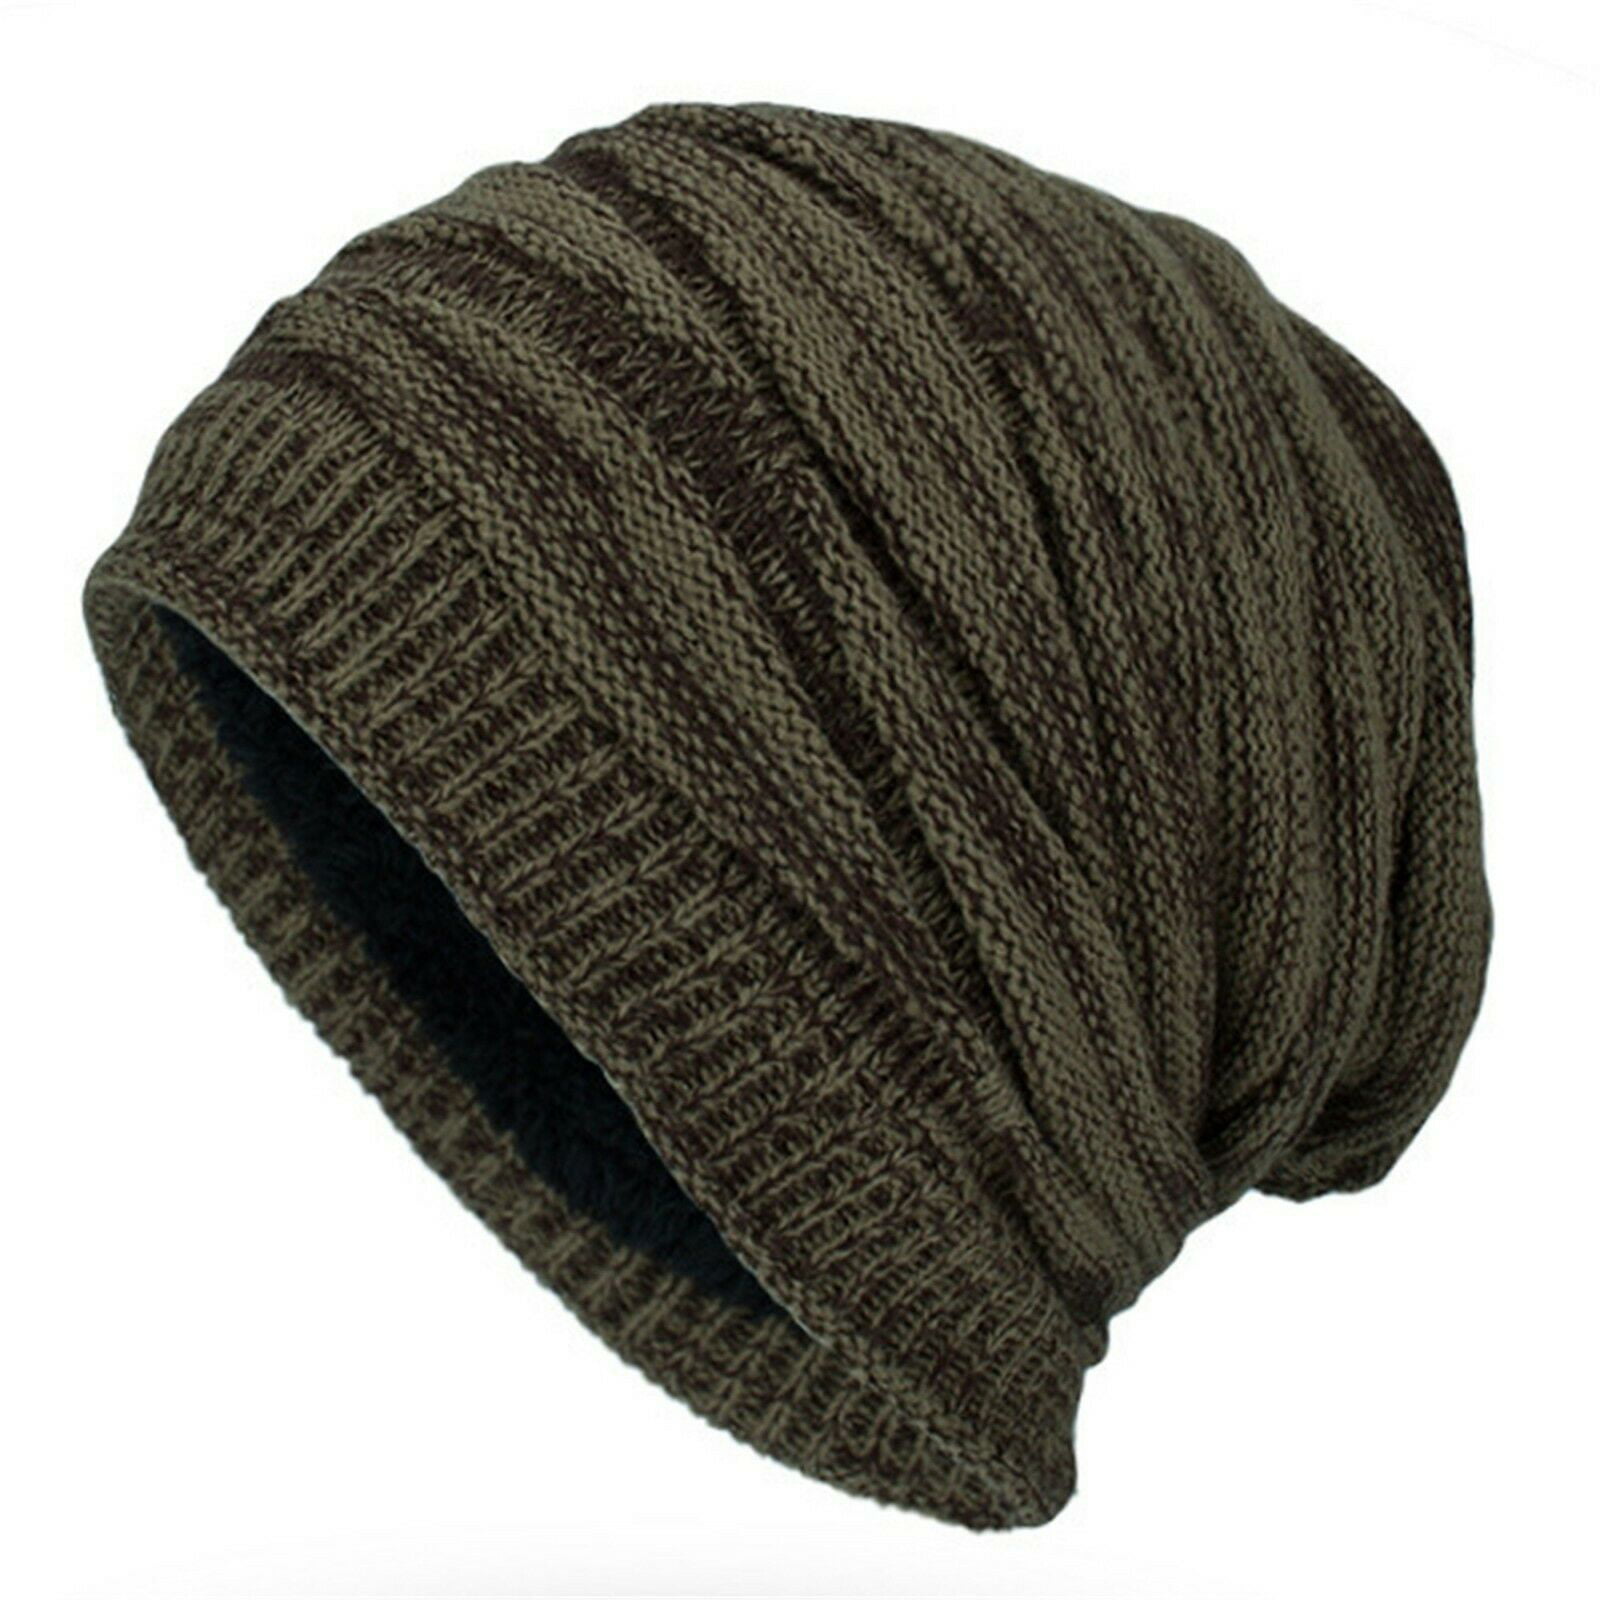 Knitted Unisex Mens Womens Winter Baggy Slouchy Solid Cotton Beanie Hat Ski Cap 